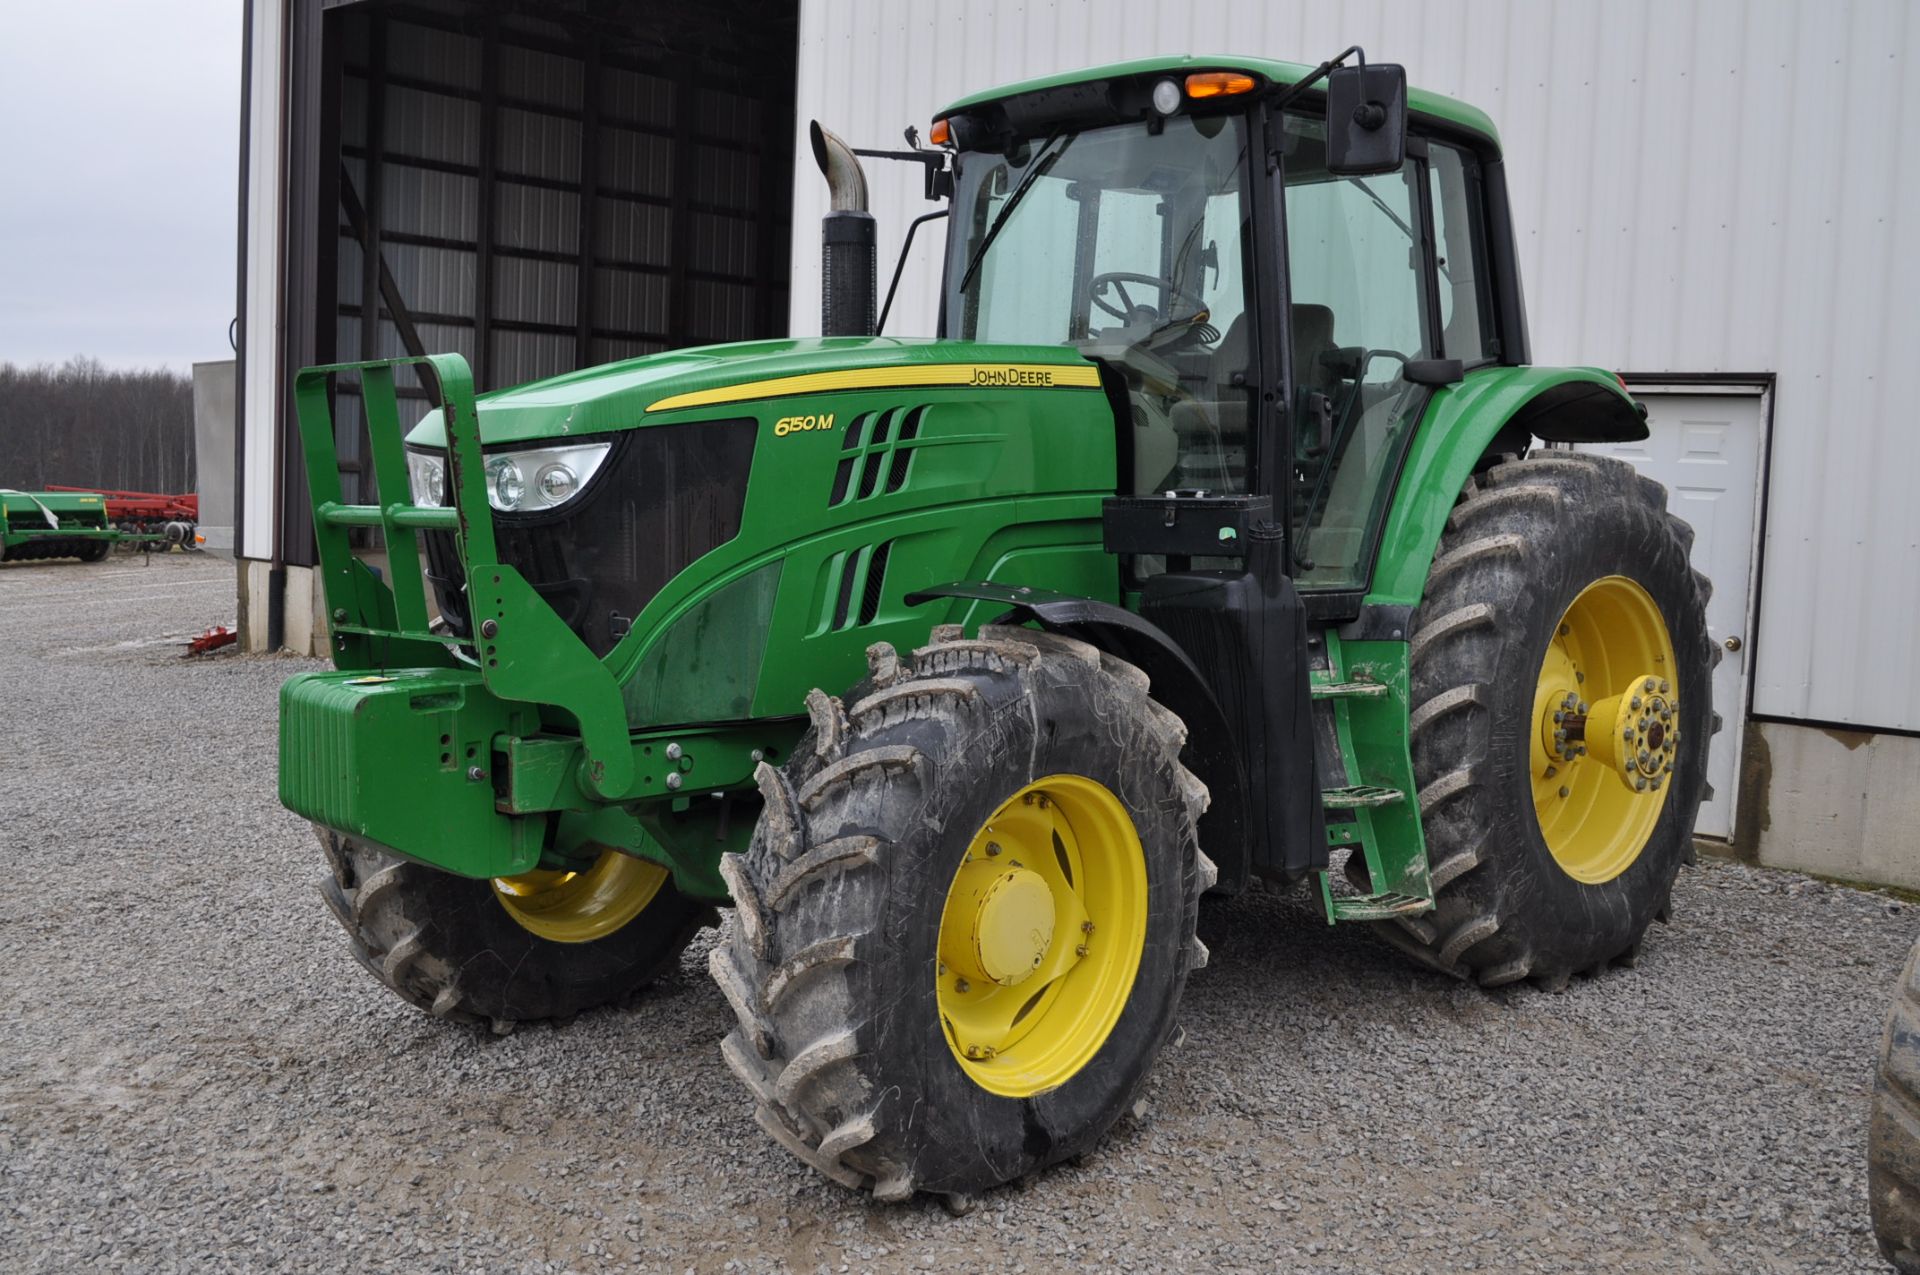 John Deere 6150M tractor, MFWD, C/H/A, 620/85 R 38 rear, 420/85 R 28 front, front fenders,